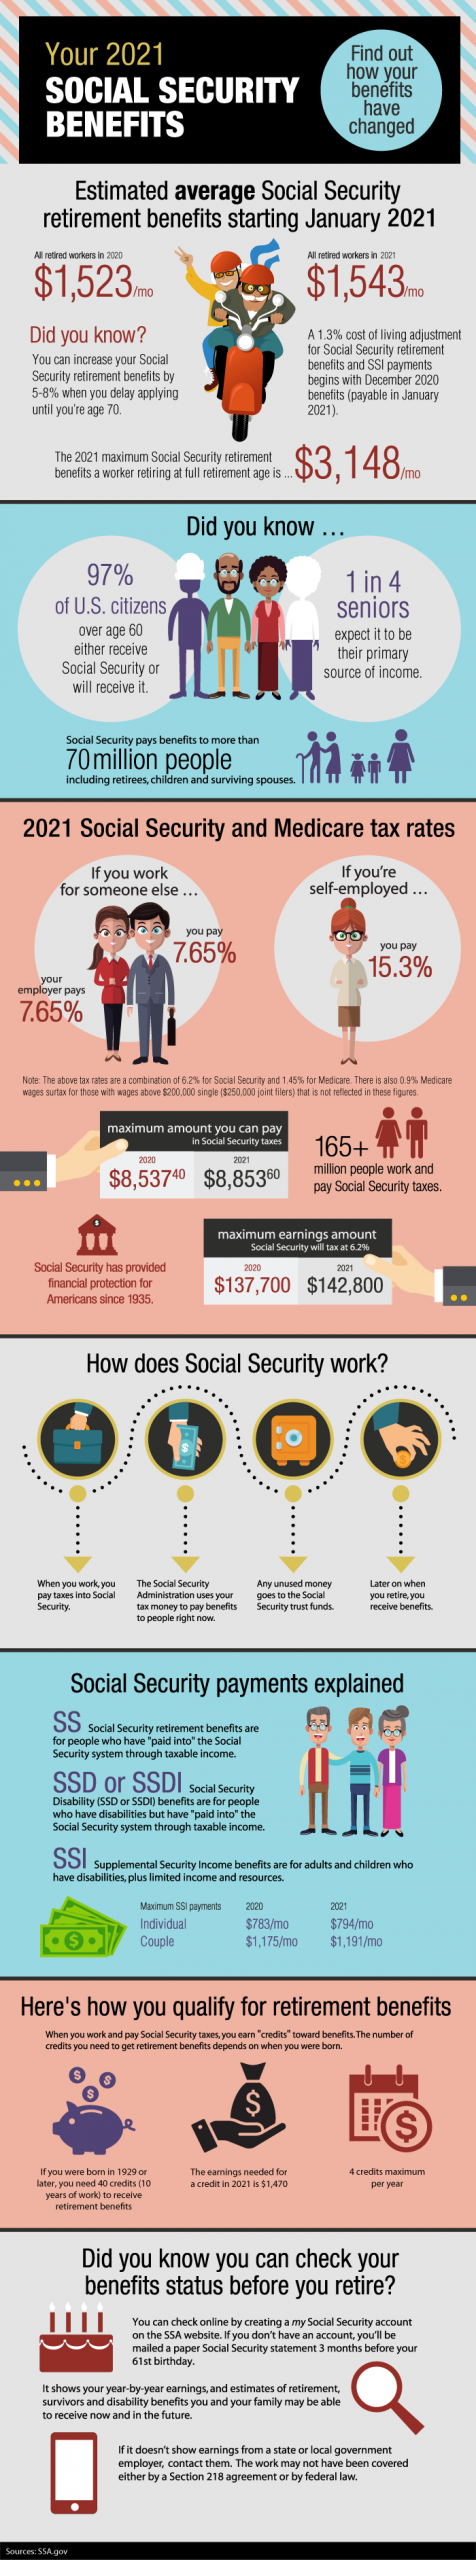 Social Security Benefits 101 For 2021 | Beaird Harris